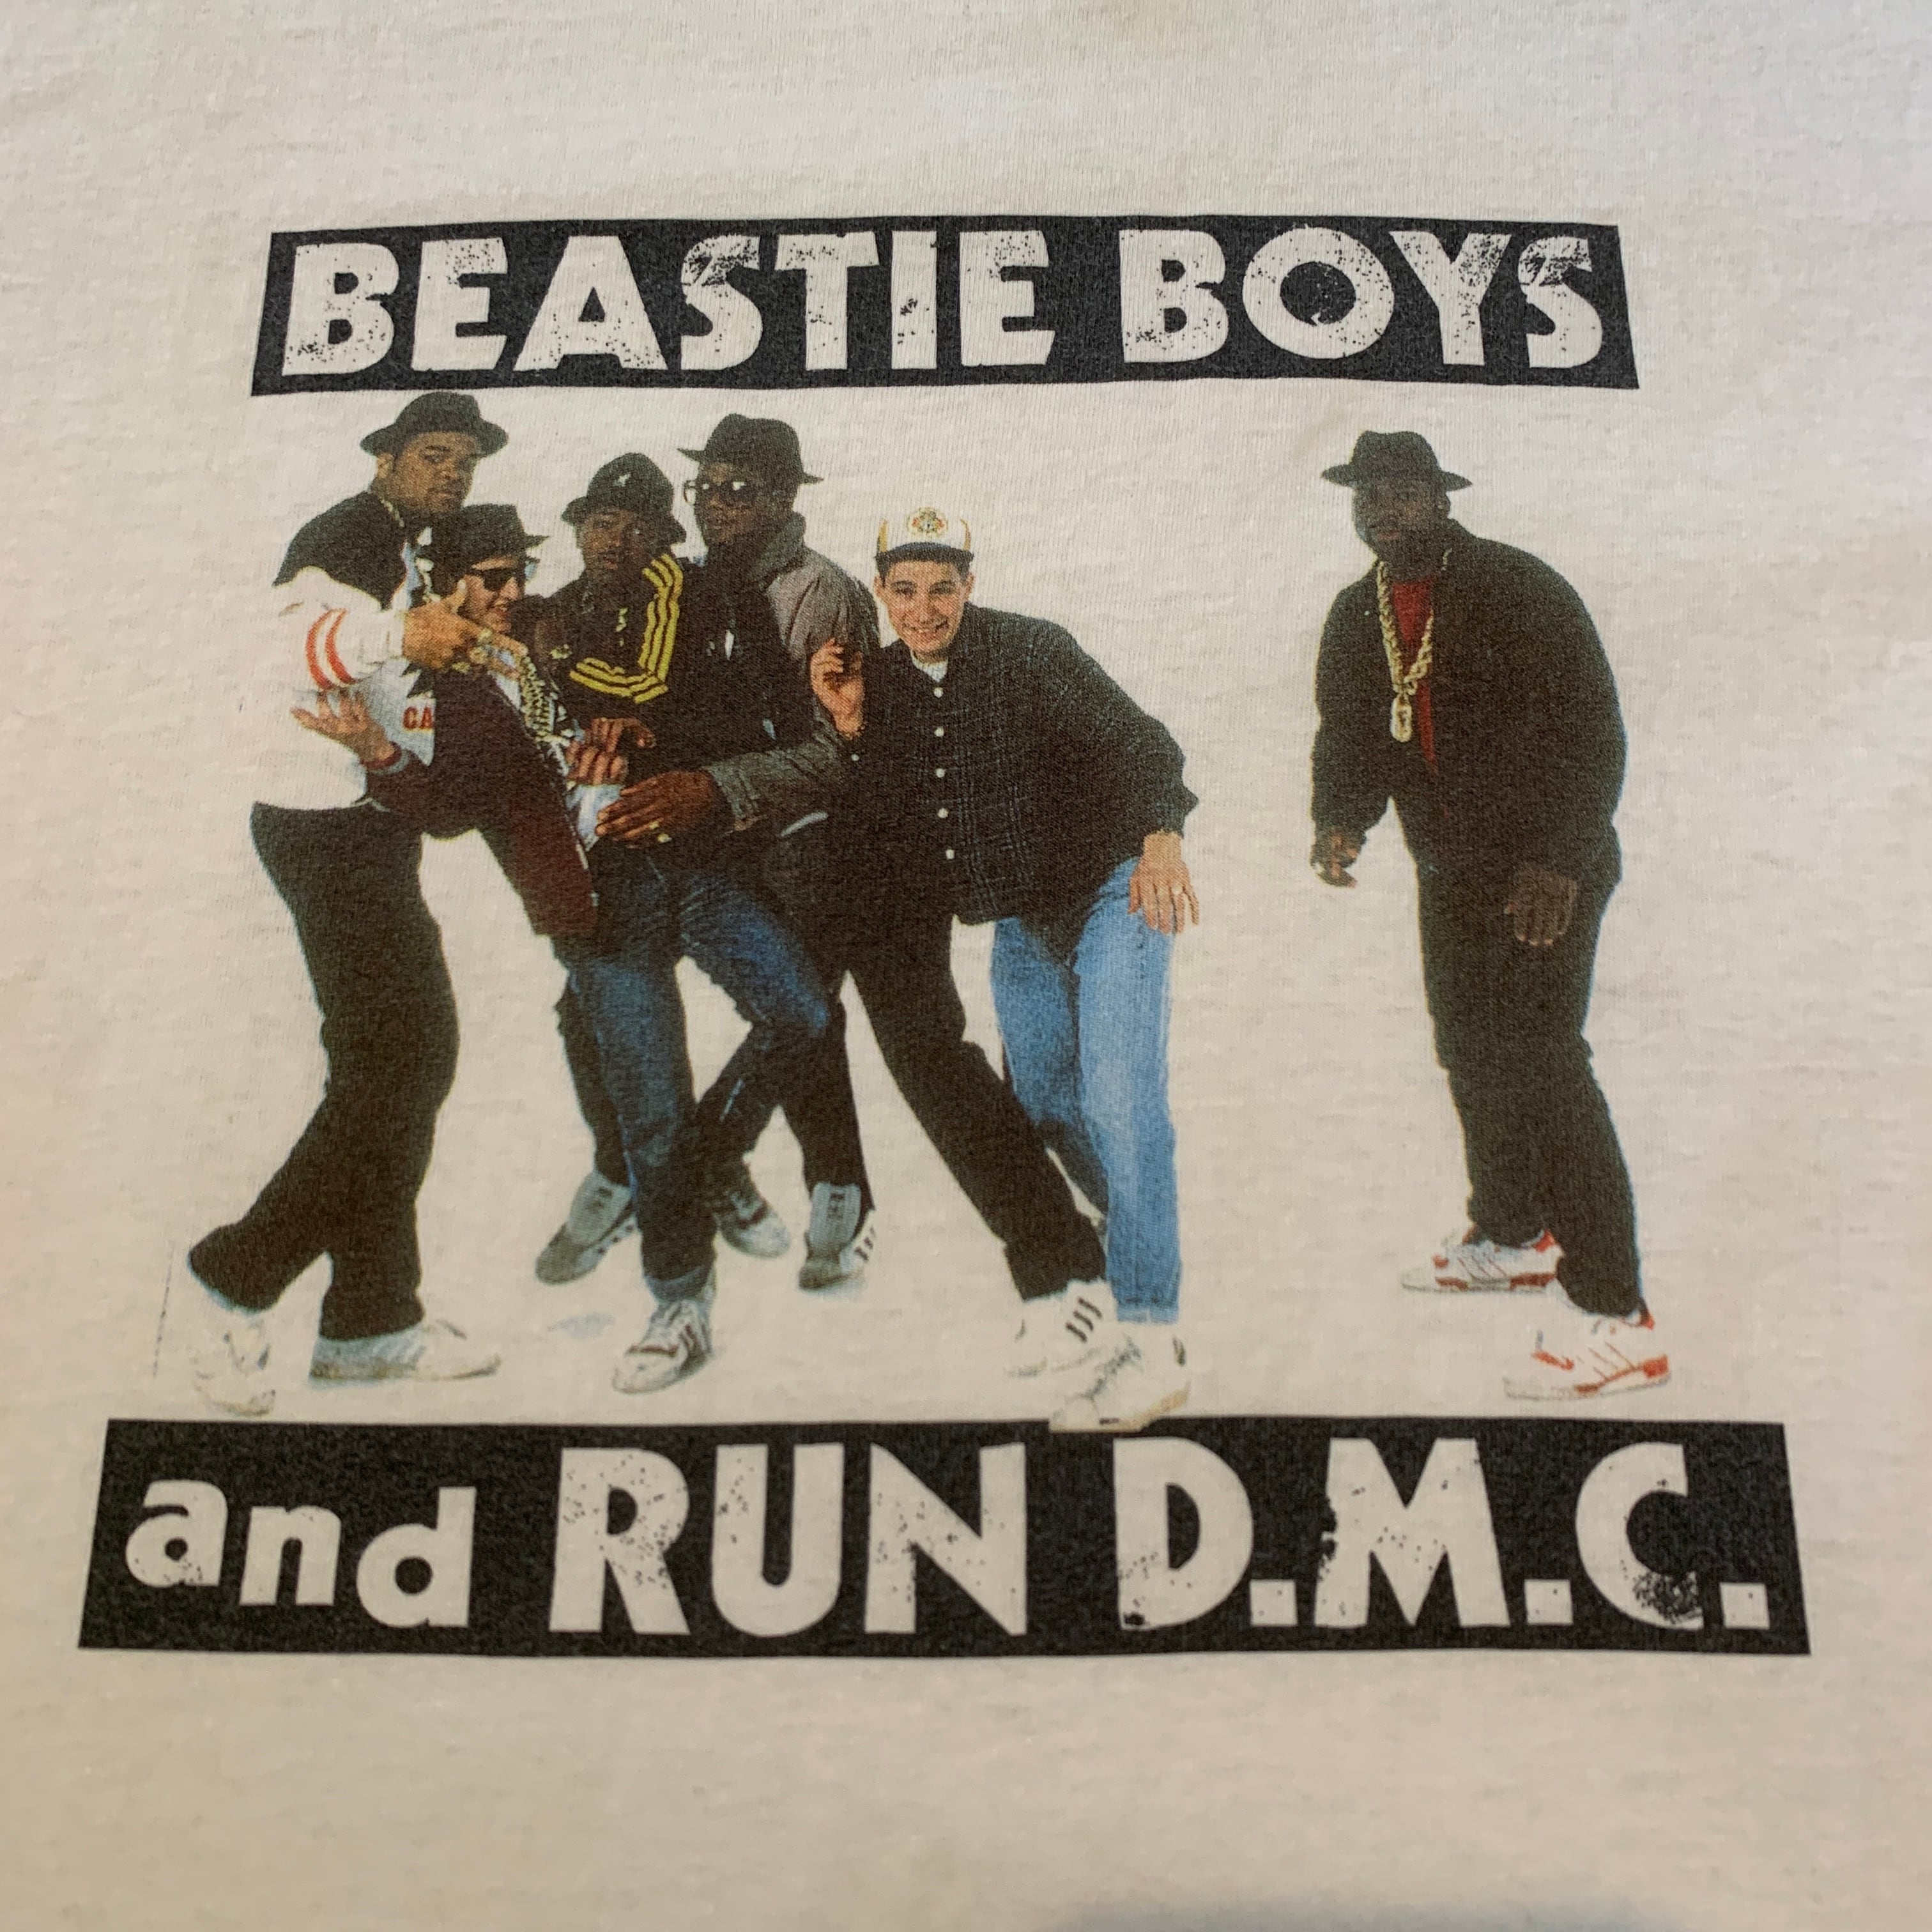 FRUIT OF THE LOOM】Beastie Boys and RUN D.M.C. Tシャツ Large